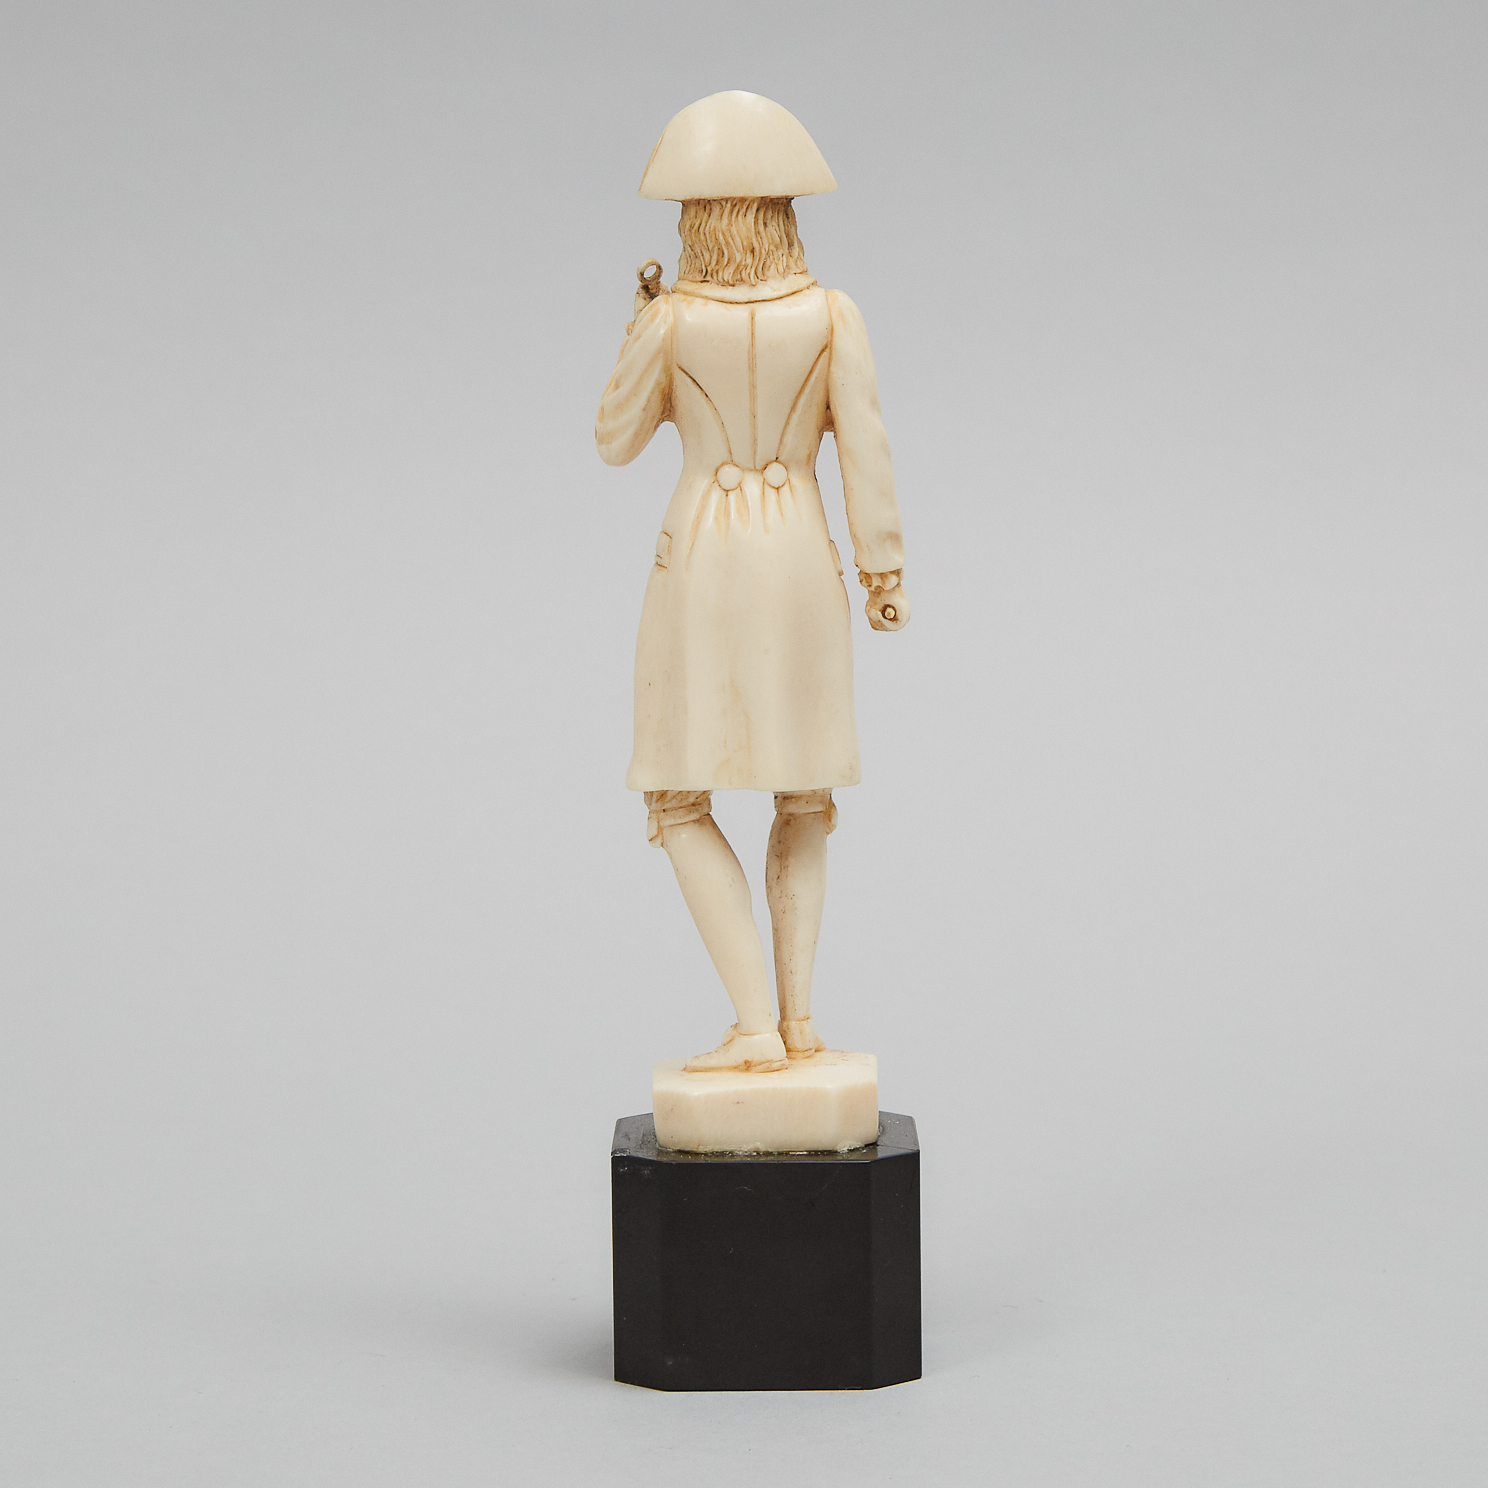 Dieppe Carved Ivory Figure of a Napoleonic Officer, early 20th century